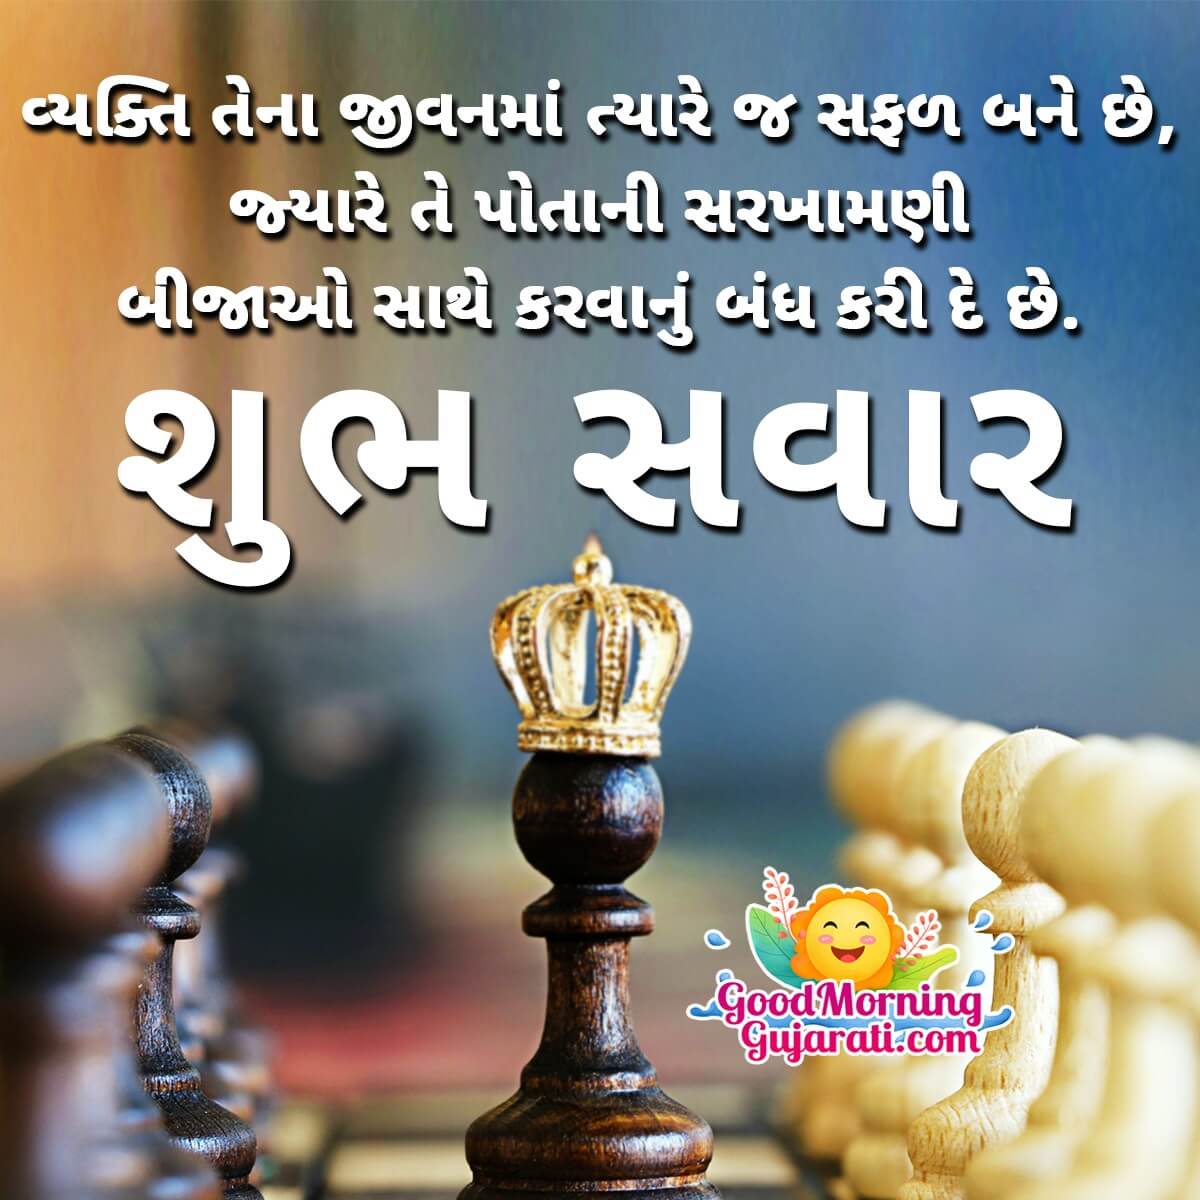 Good Morning Gujarati Wishes - Good Morning Wishes & Images in ...